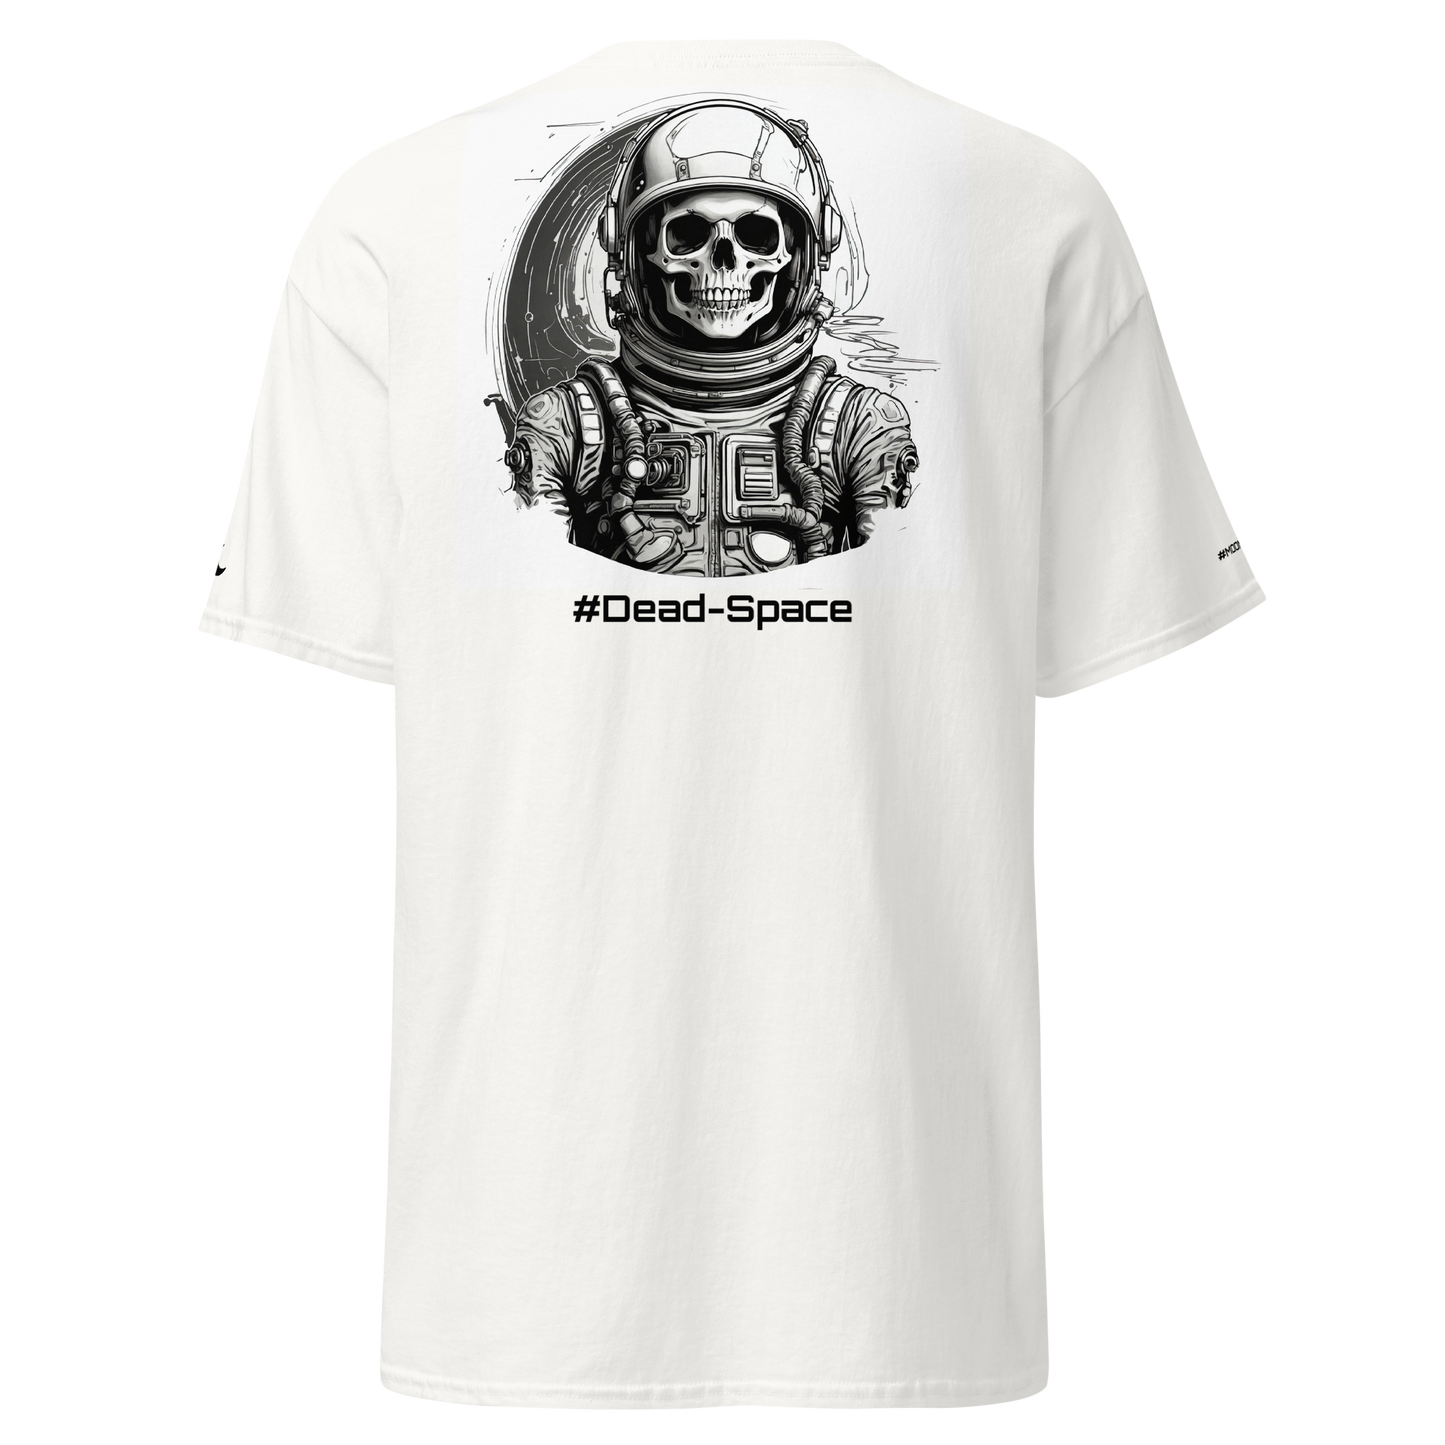 #Dead-Space - Moon Labs Original and 1st Dead-Space Collection T-Shirt